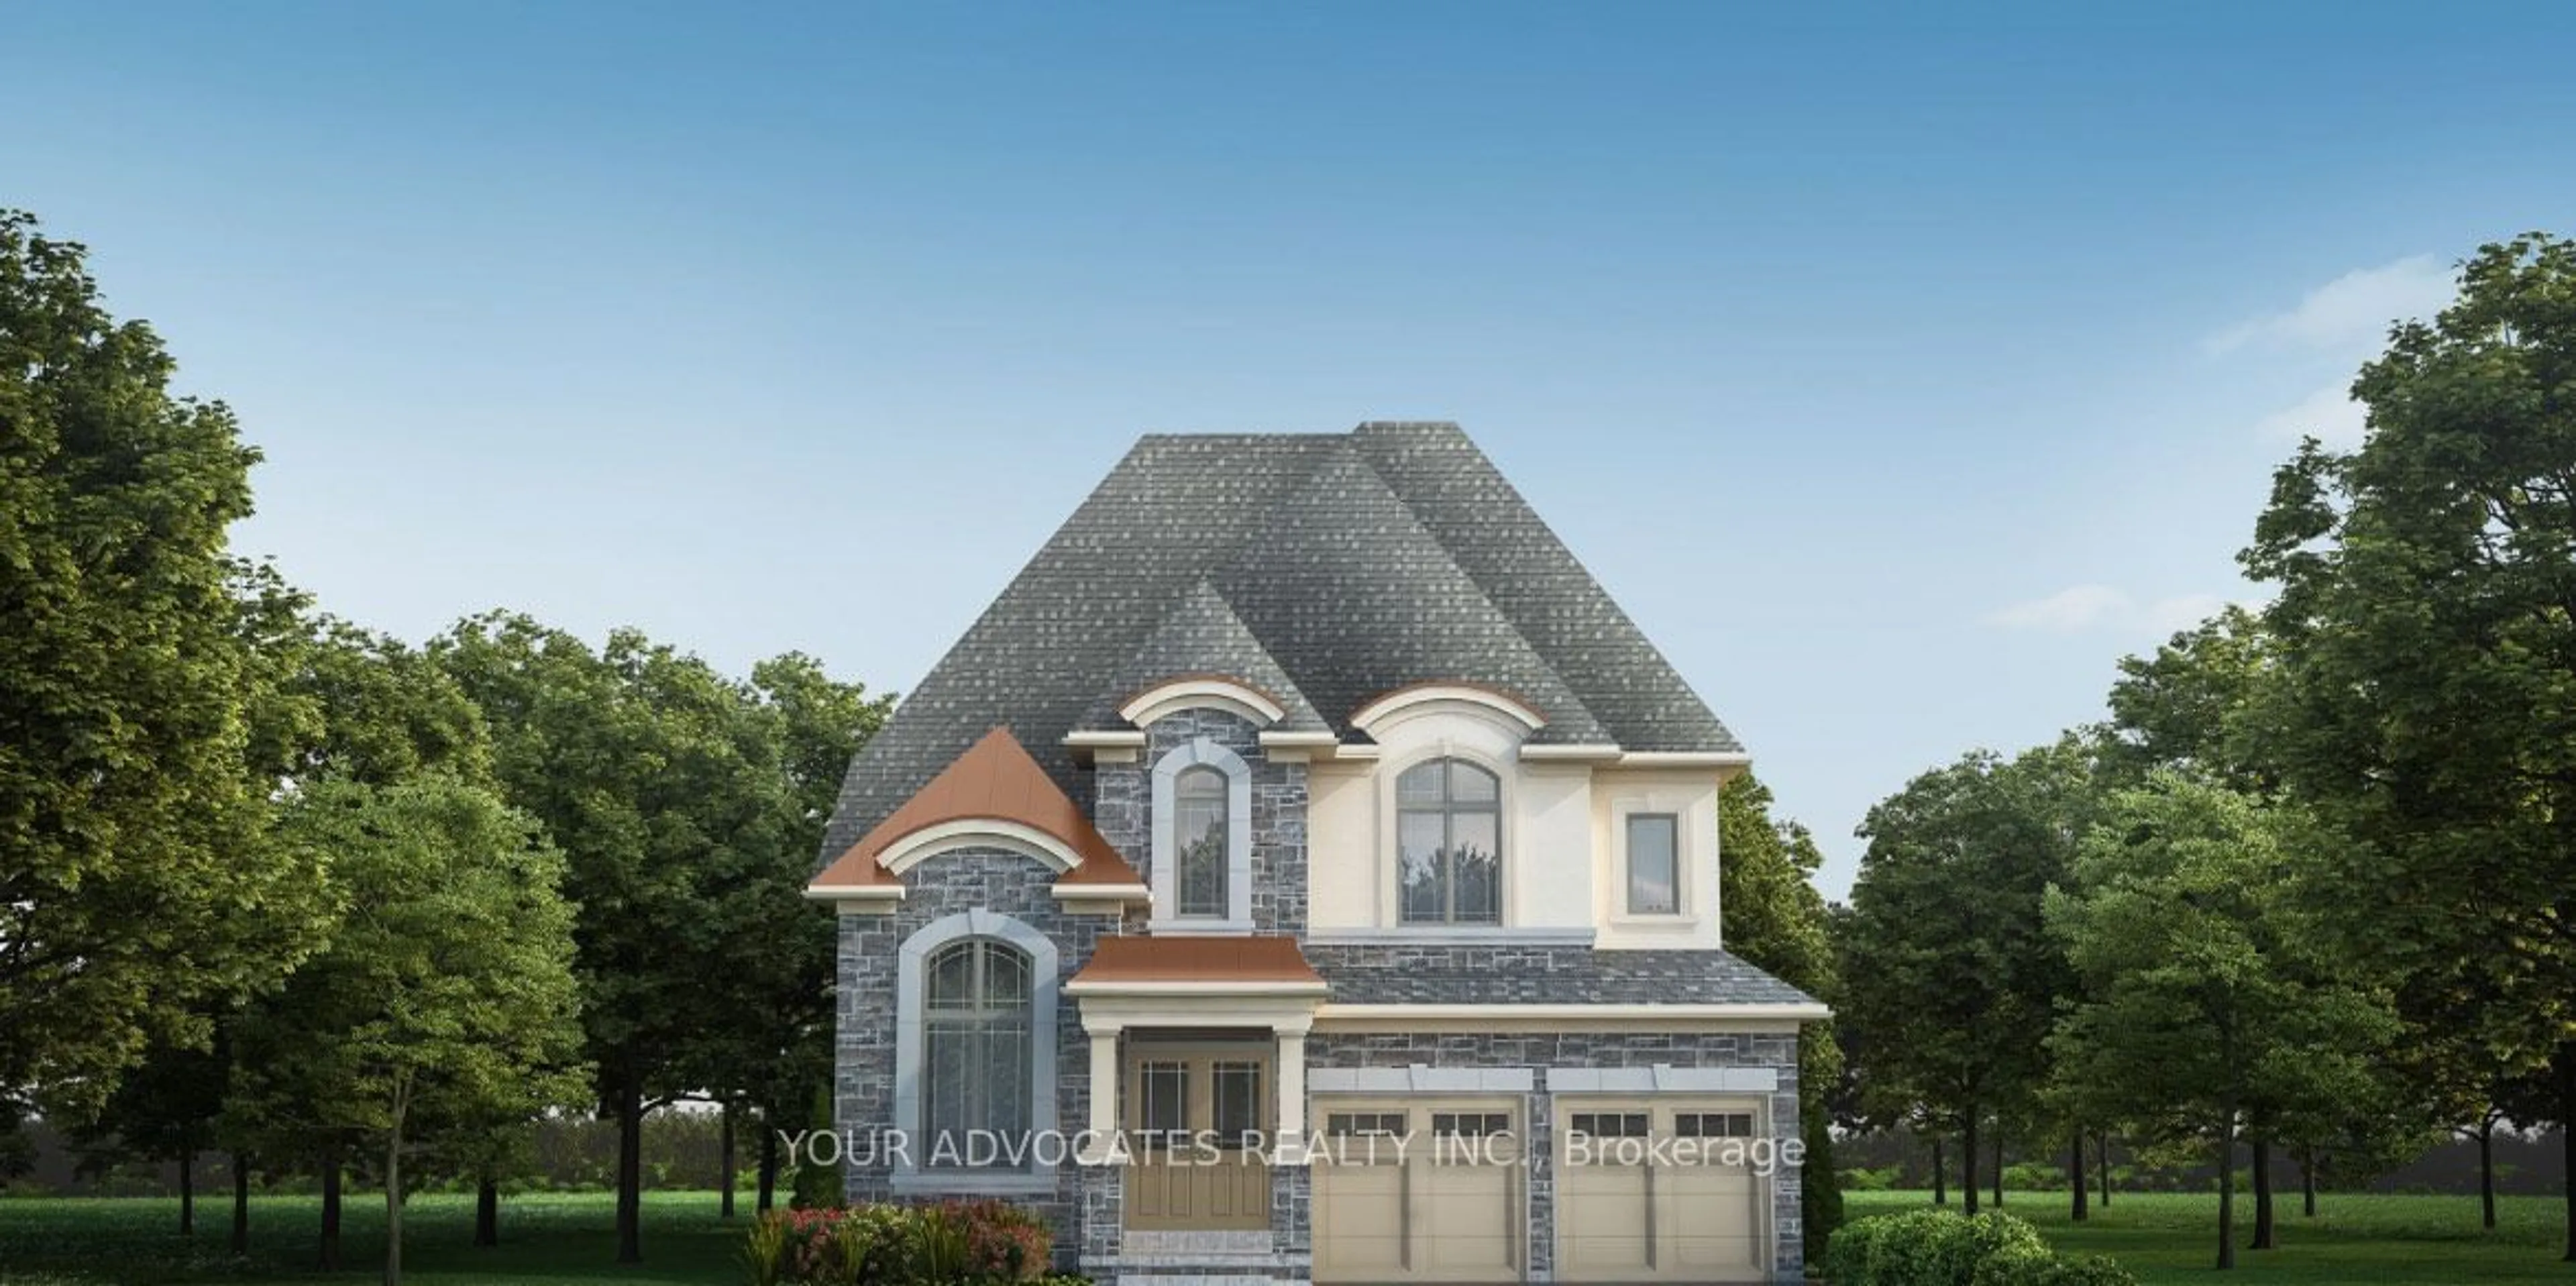 Home with brick exterior material for 75 James Walker Ave, Caledon Ontario L7C 4M8